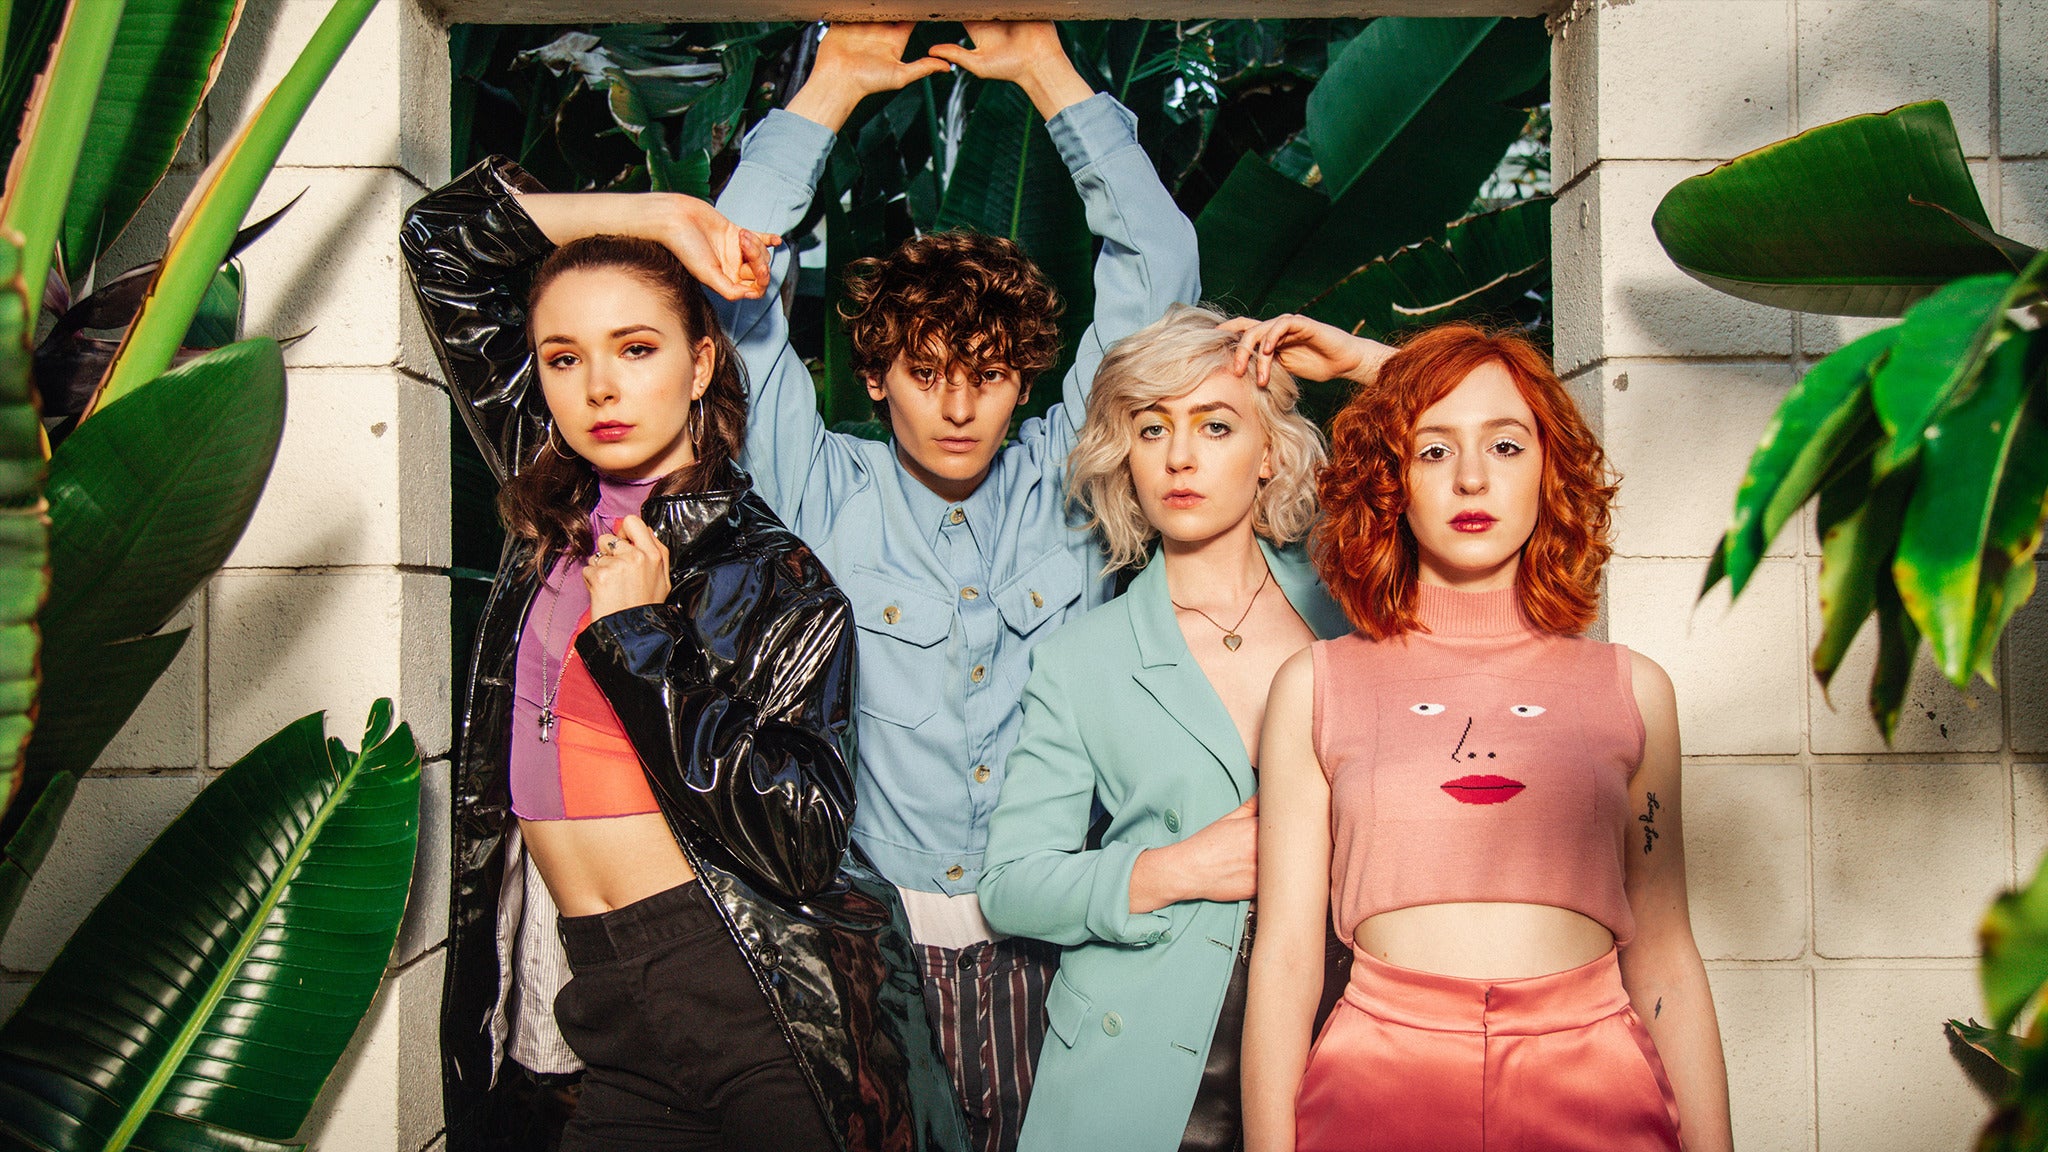 Advanced Placement Tour feat. The Regrettes, Welles, and Micky James in New York promo photo for Ticketmaster presale offer code